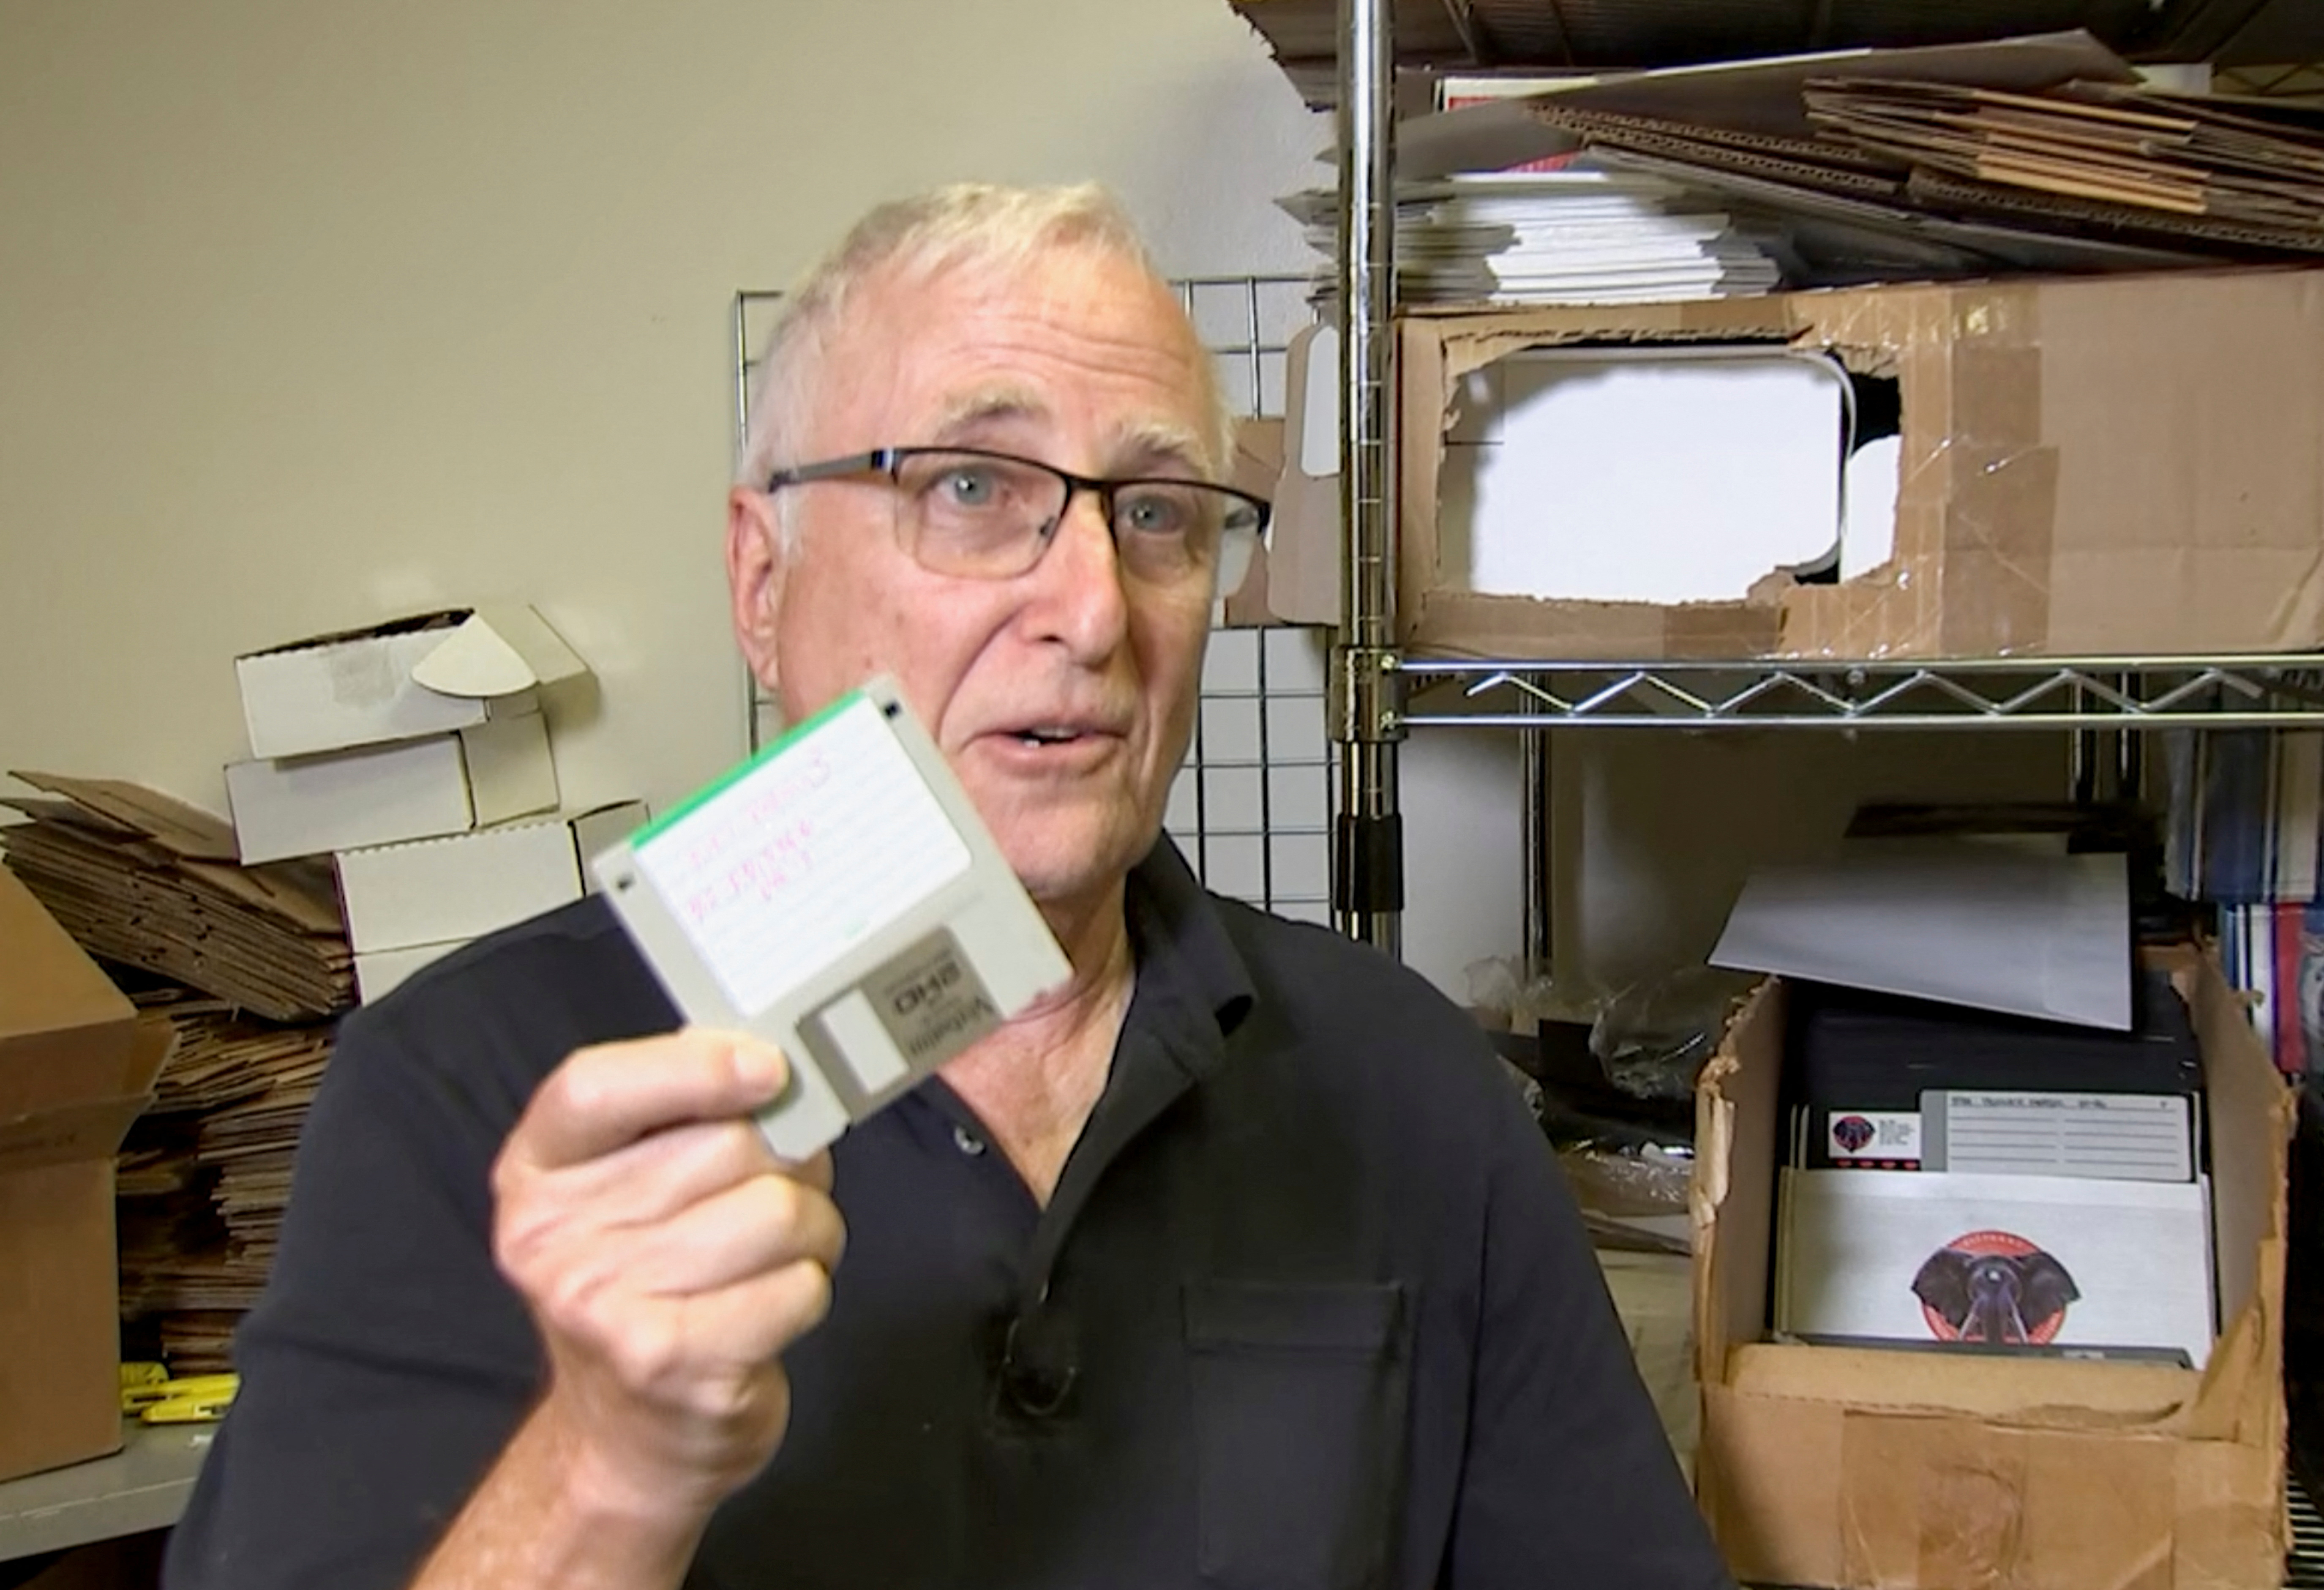 image A 1990s relic, floppy disks get second life at California warehouse